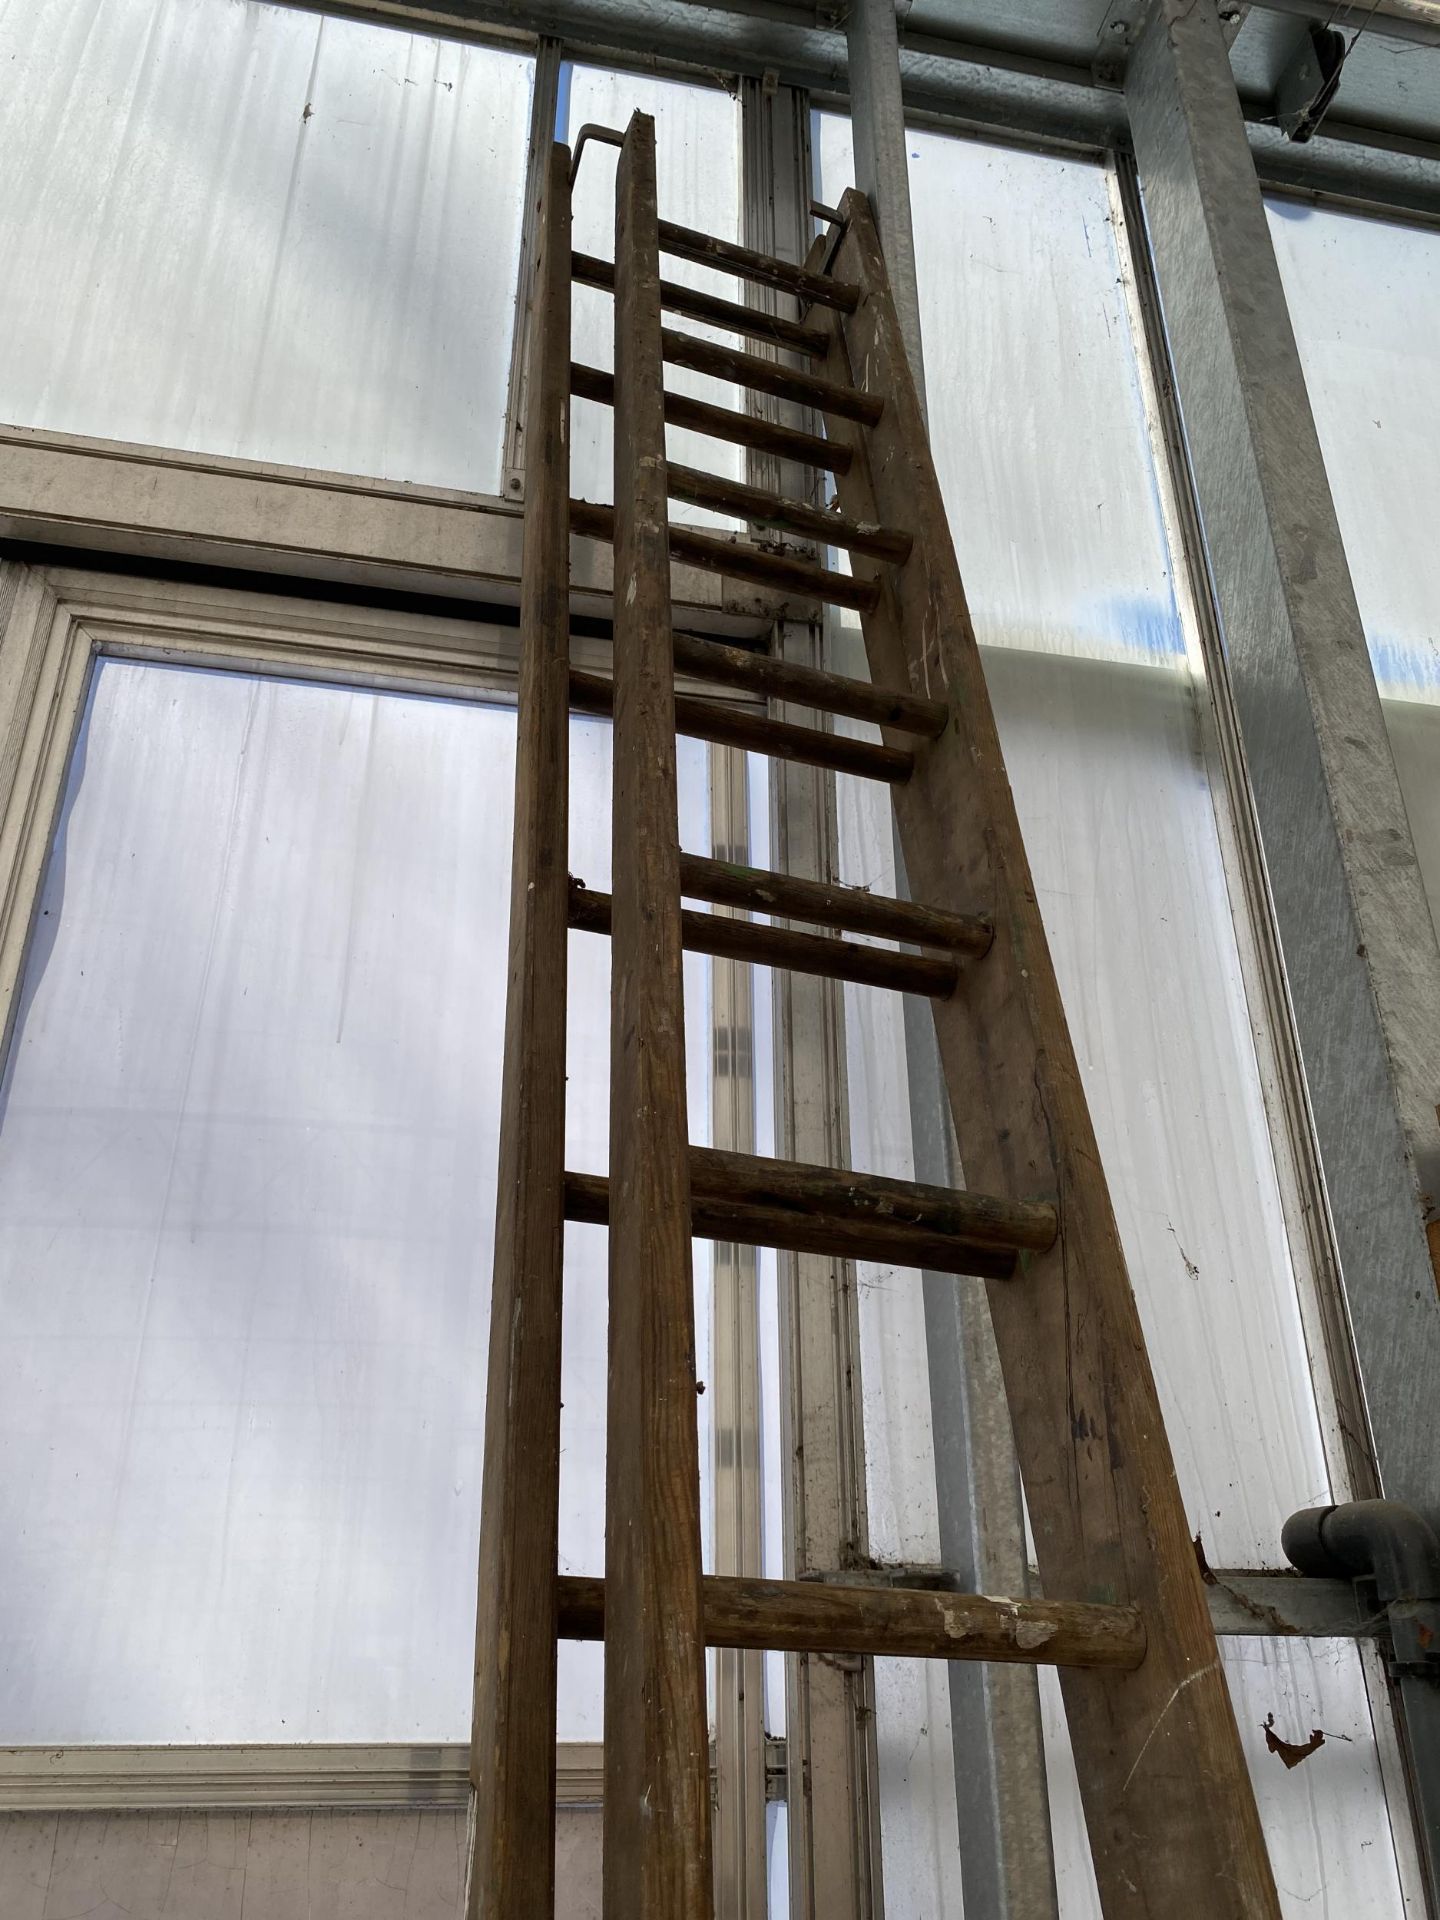 A TWO SECTION VINTAGE WOODEN EXTENDABLE 30 RUNG LADDER - Image 2 of 3